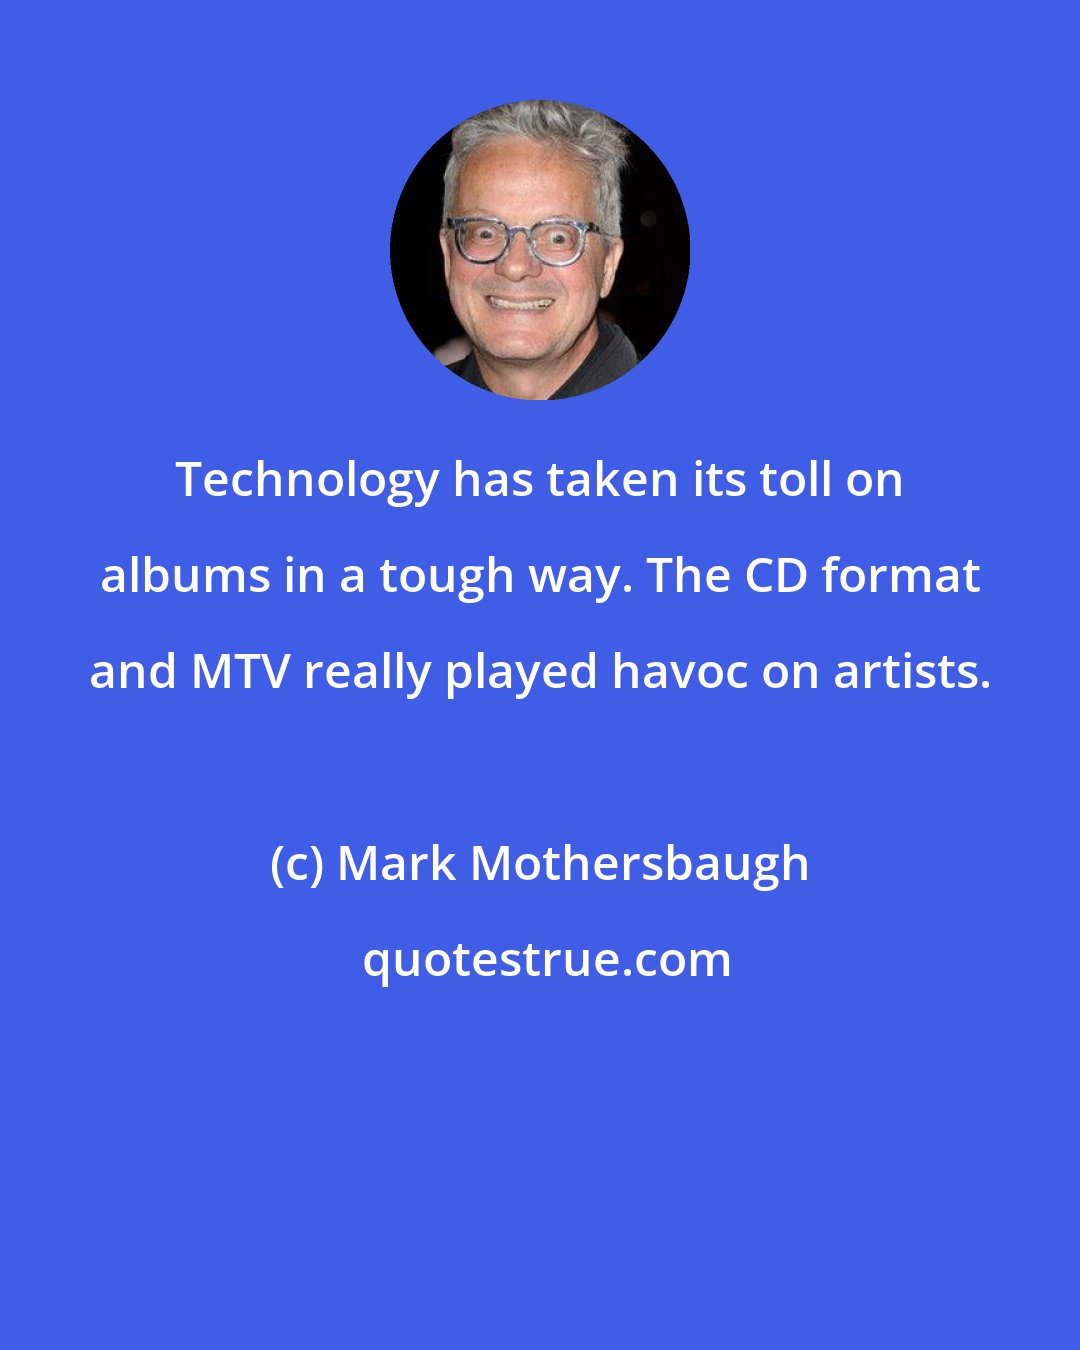 Mark Mothersbaugh: Technology has taken its toll on albums in a tough way. The CD format and MTV really played havoc on artists.